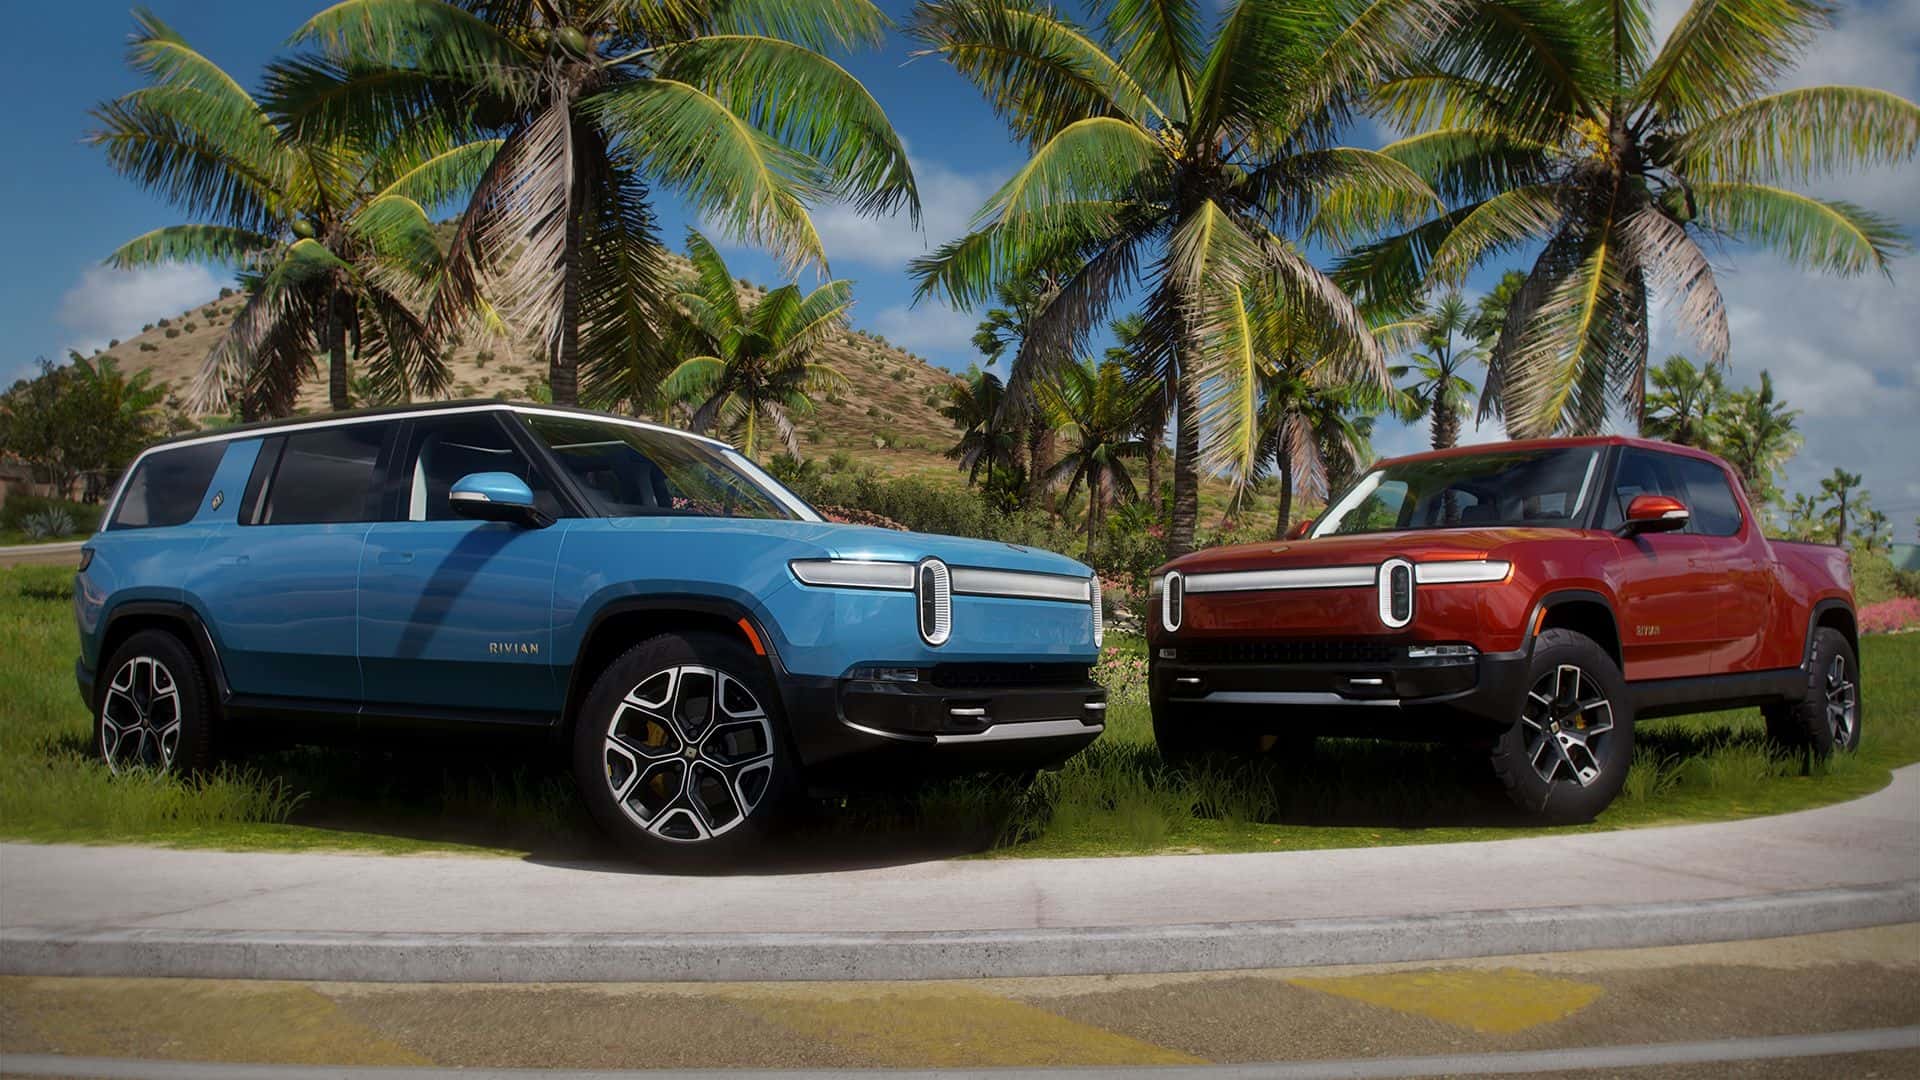 forza horizon 5 now includes the rivian r1s and r1t